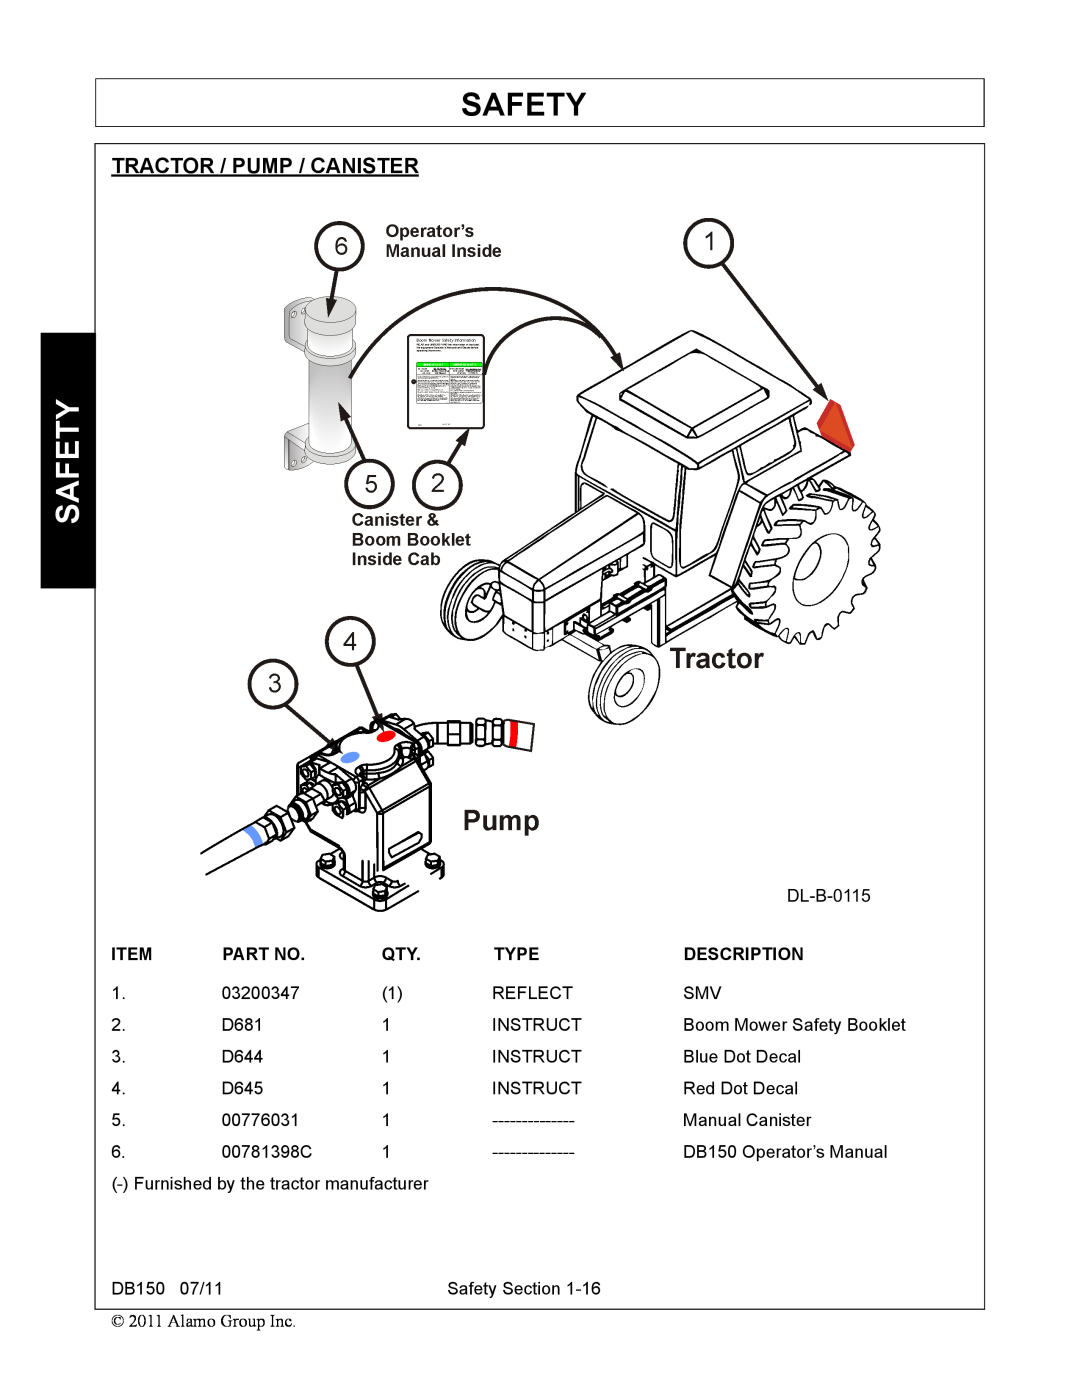 Rhino Mounts DB150 manual Safety, Tractor / Pump / Canister, Type, Description 